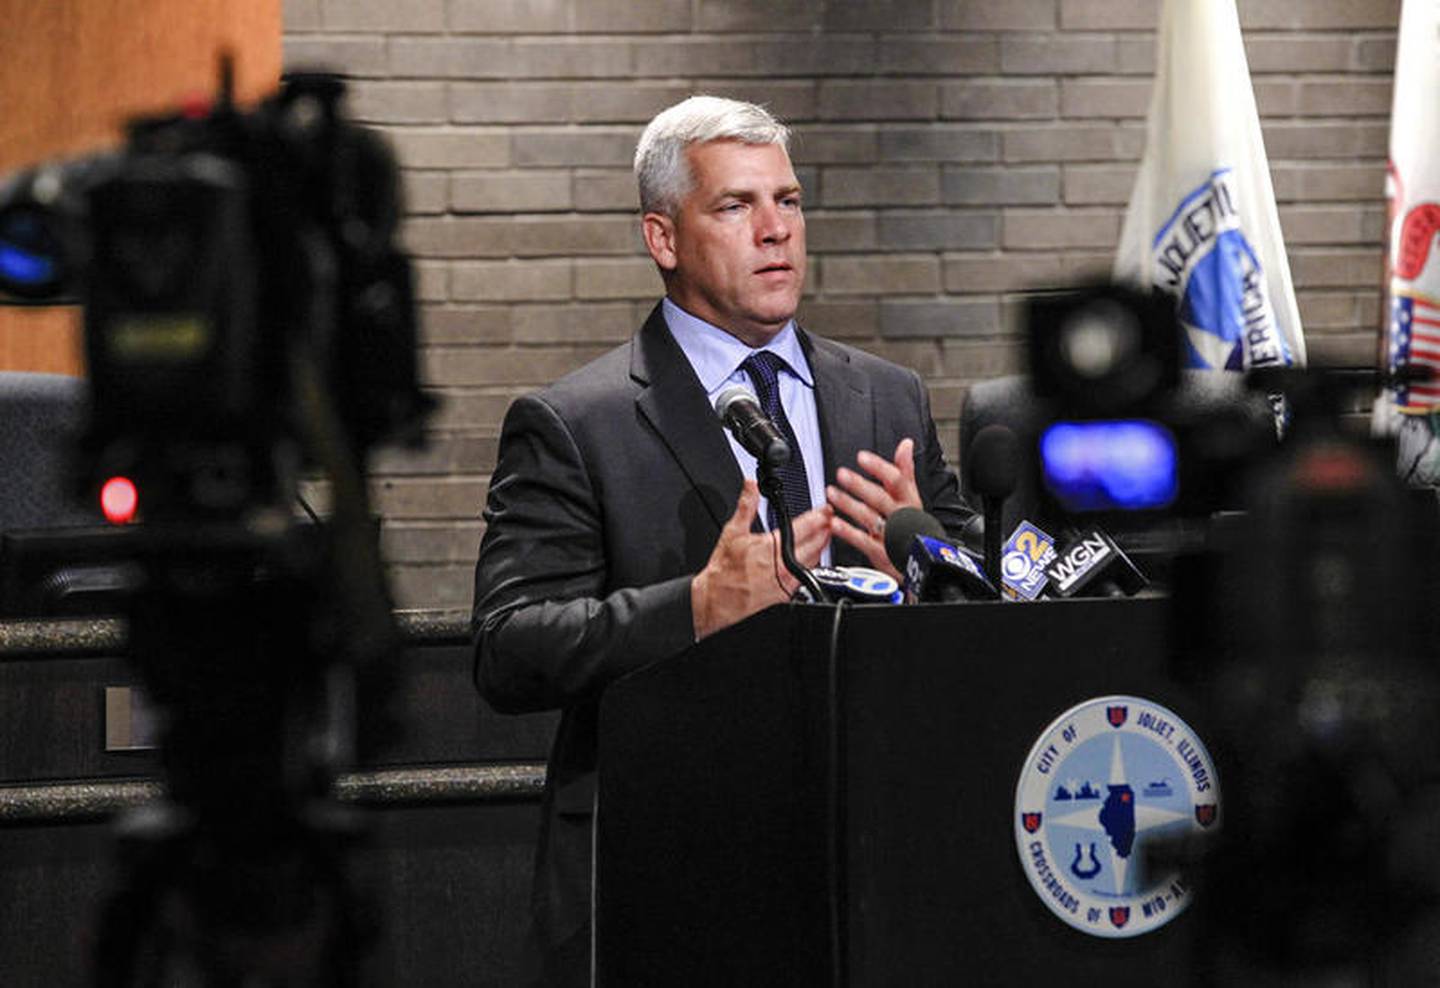 Mayor Bob O'Dekirk speaks to members of the press Tuesday, June 9, 2020, while addressing his use of force against 23-year-old Victor Williams and 28-year-old Jamal Smith on Monday, June 1, after a mob began assaulting police near the intersection of Jefferson Street and Larkin Avenue in Joliet, Ill.